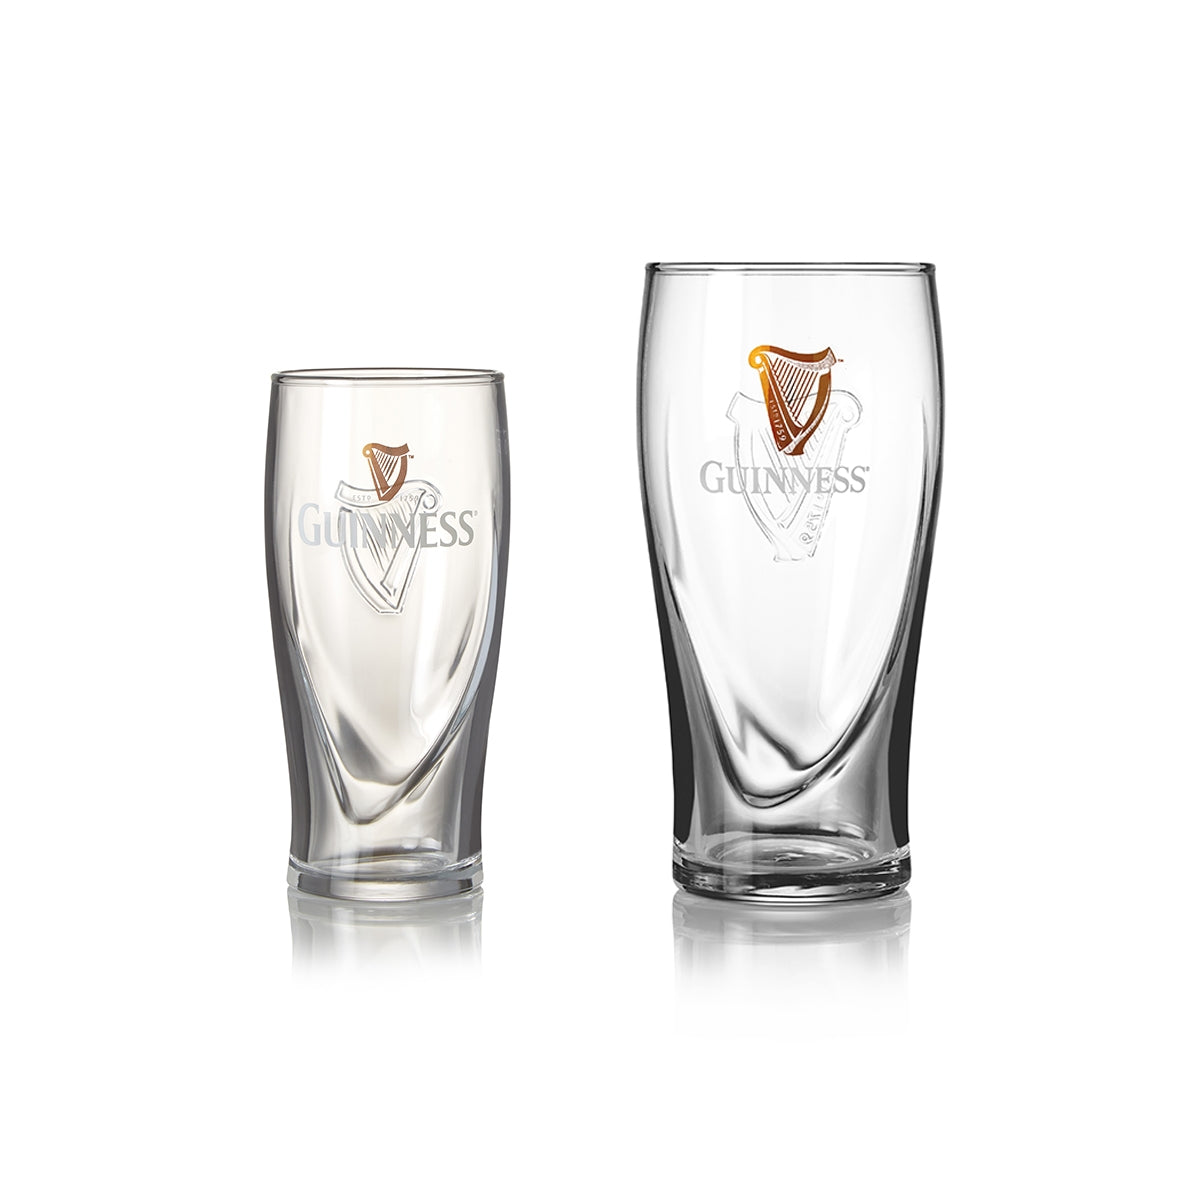 Two Guinness Half Pint Glass 6 Packs on a white surface.